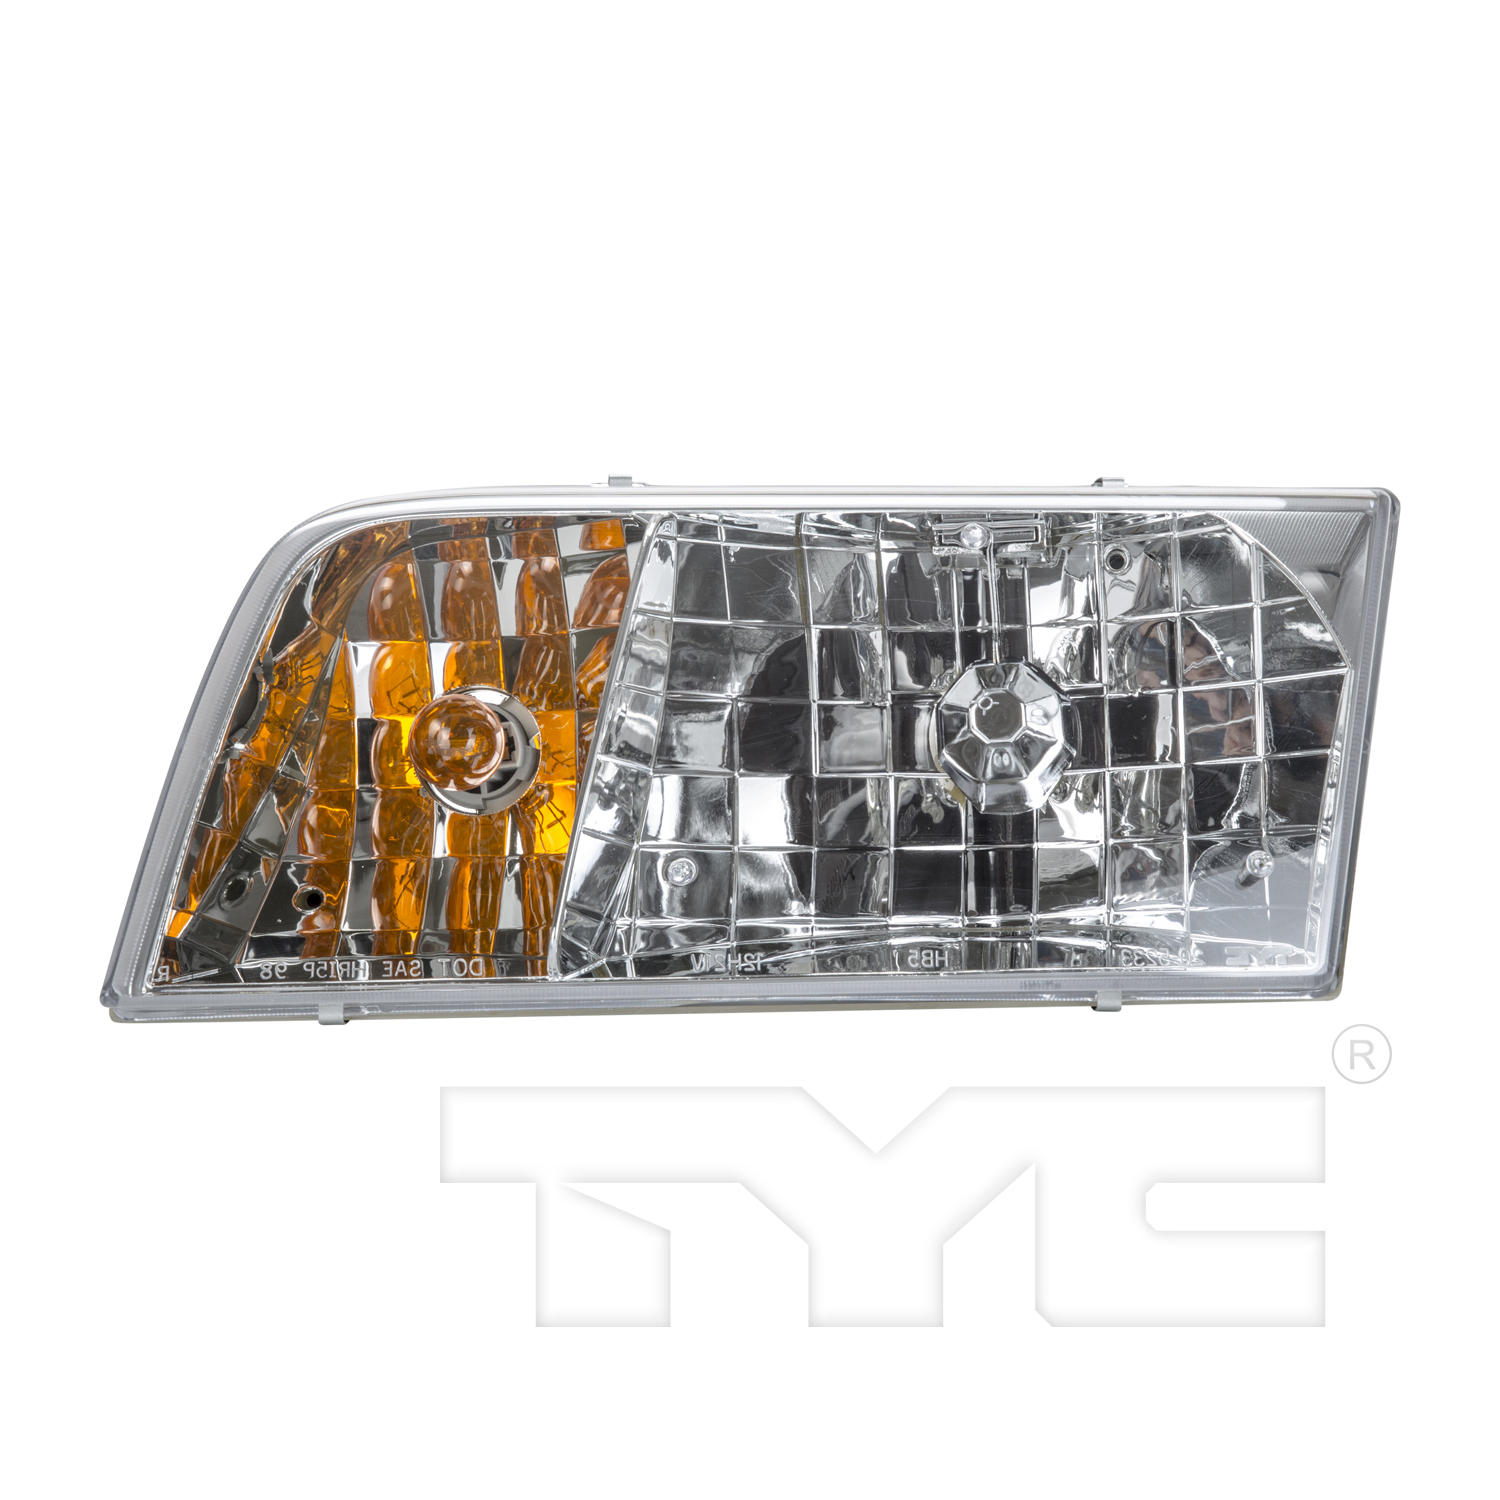 Aftermarket HEADLIGHTS for FORD - CROWN VICTORIA, CROWN VICTORIA,03-11,LT Headlamp assy composite